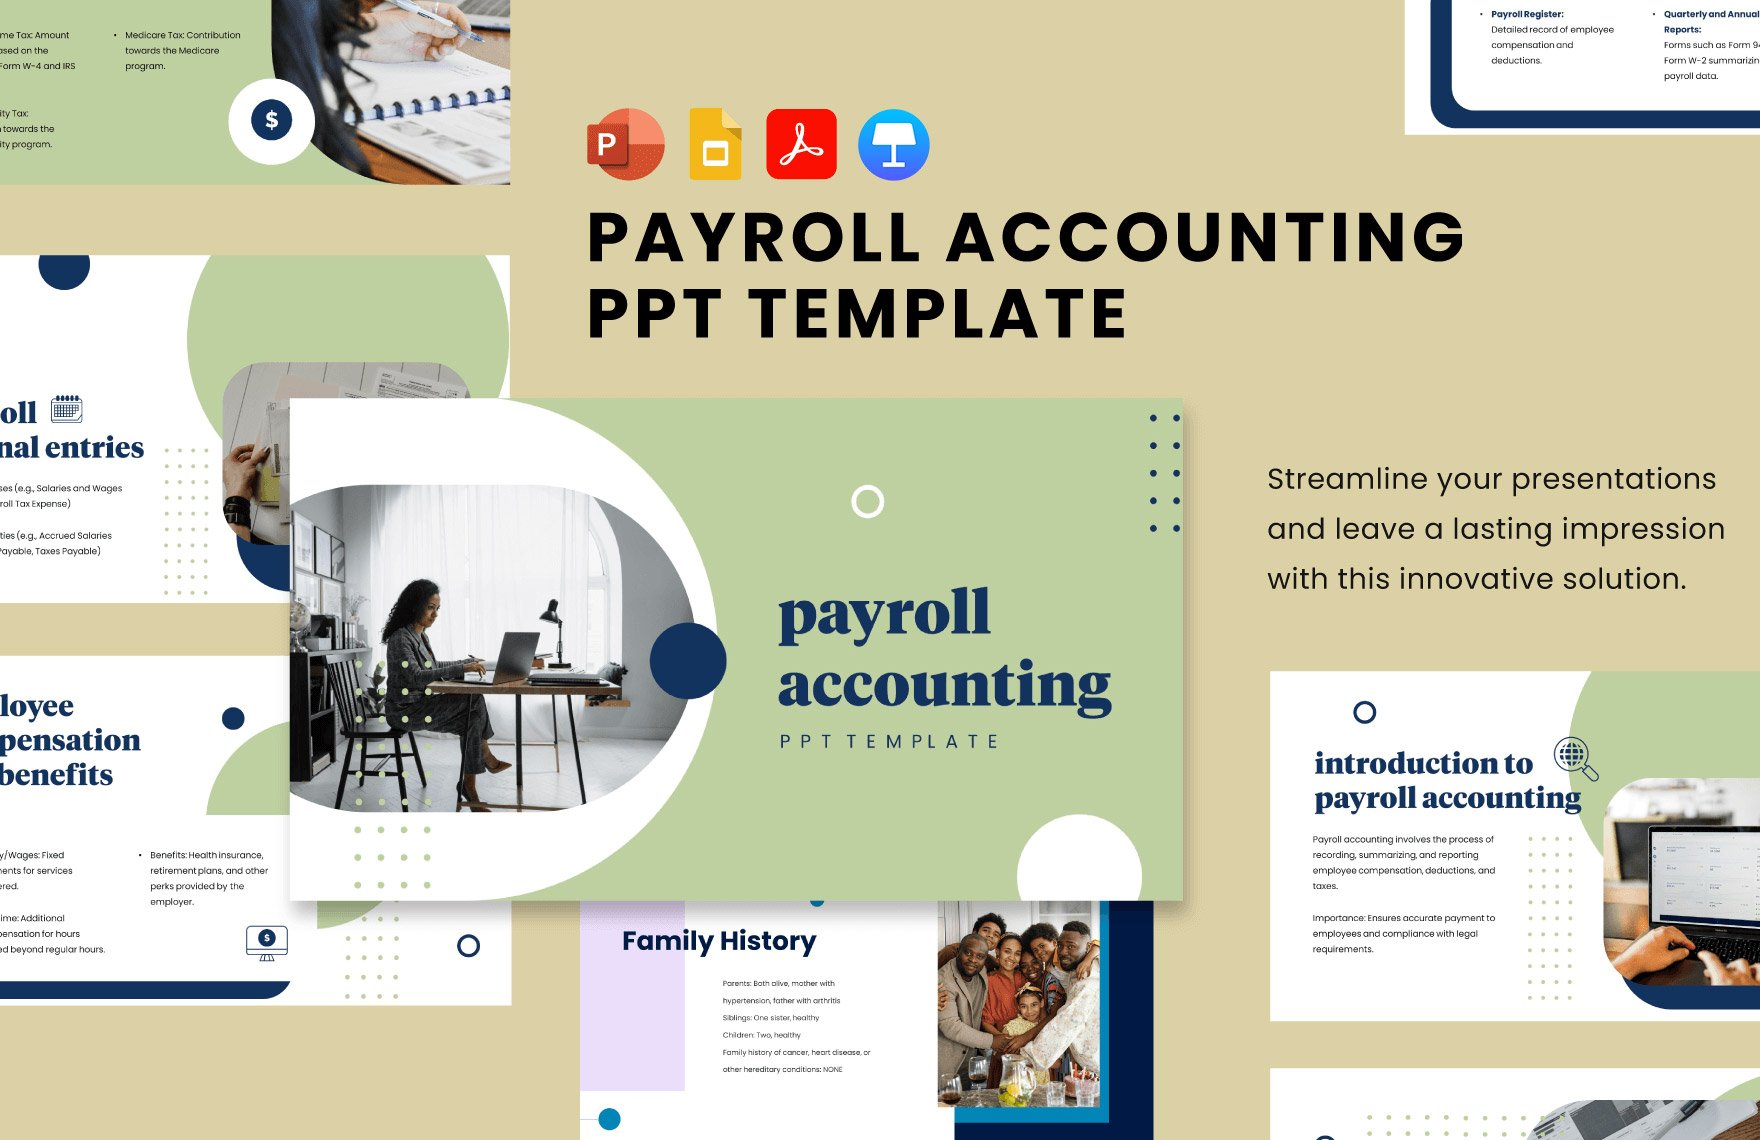 Payroll Accounting PPT Template in PDF, PowerPoint, Google Slides, Apple Keynote